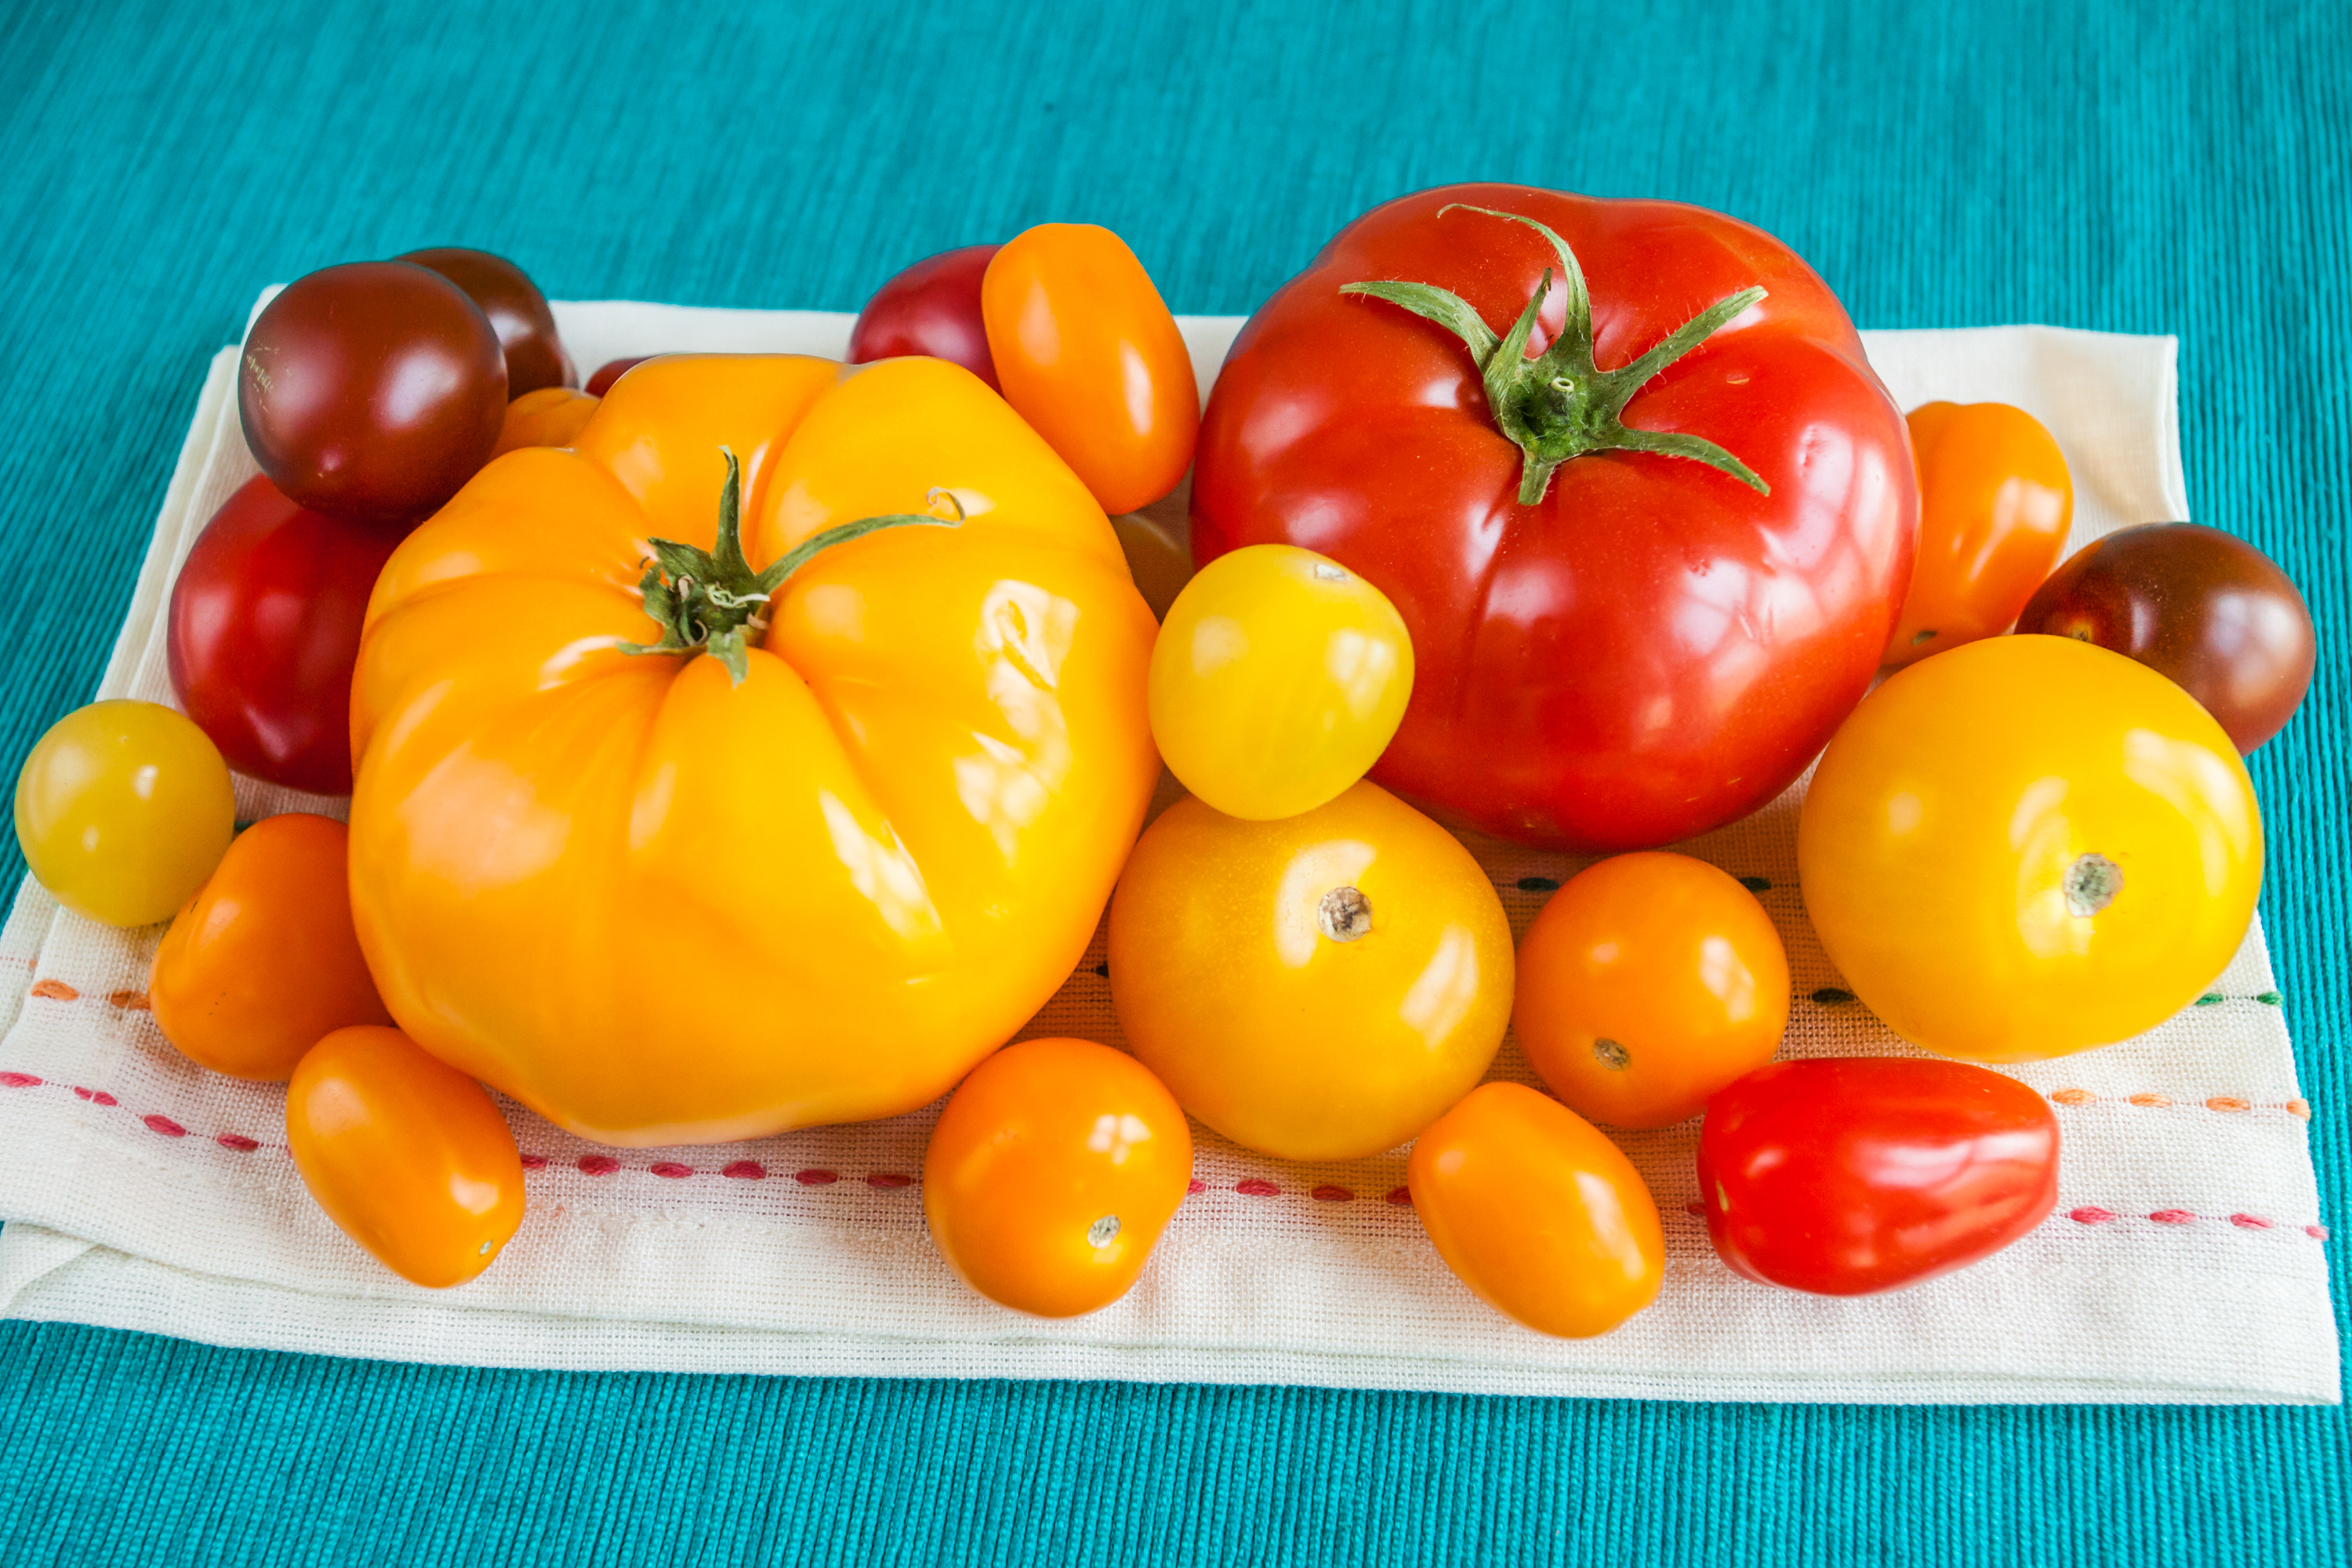 The Best Tomatoes for Low Acid | ehow